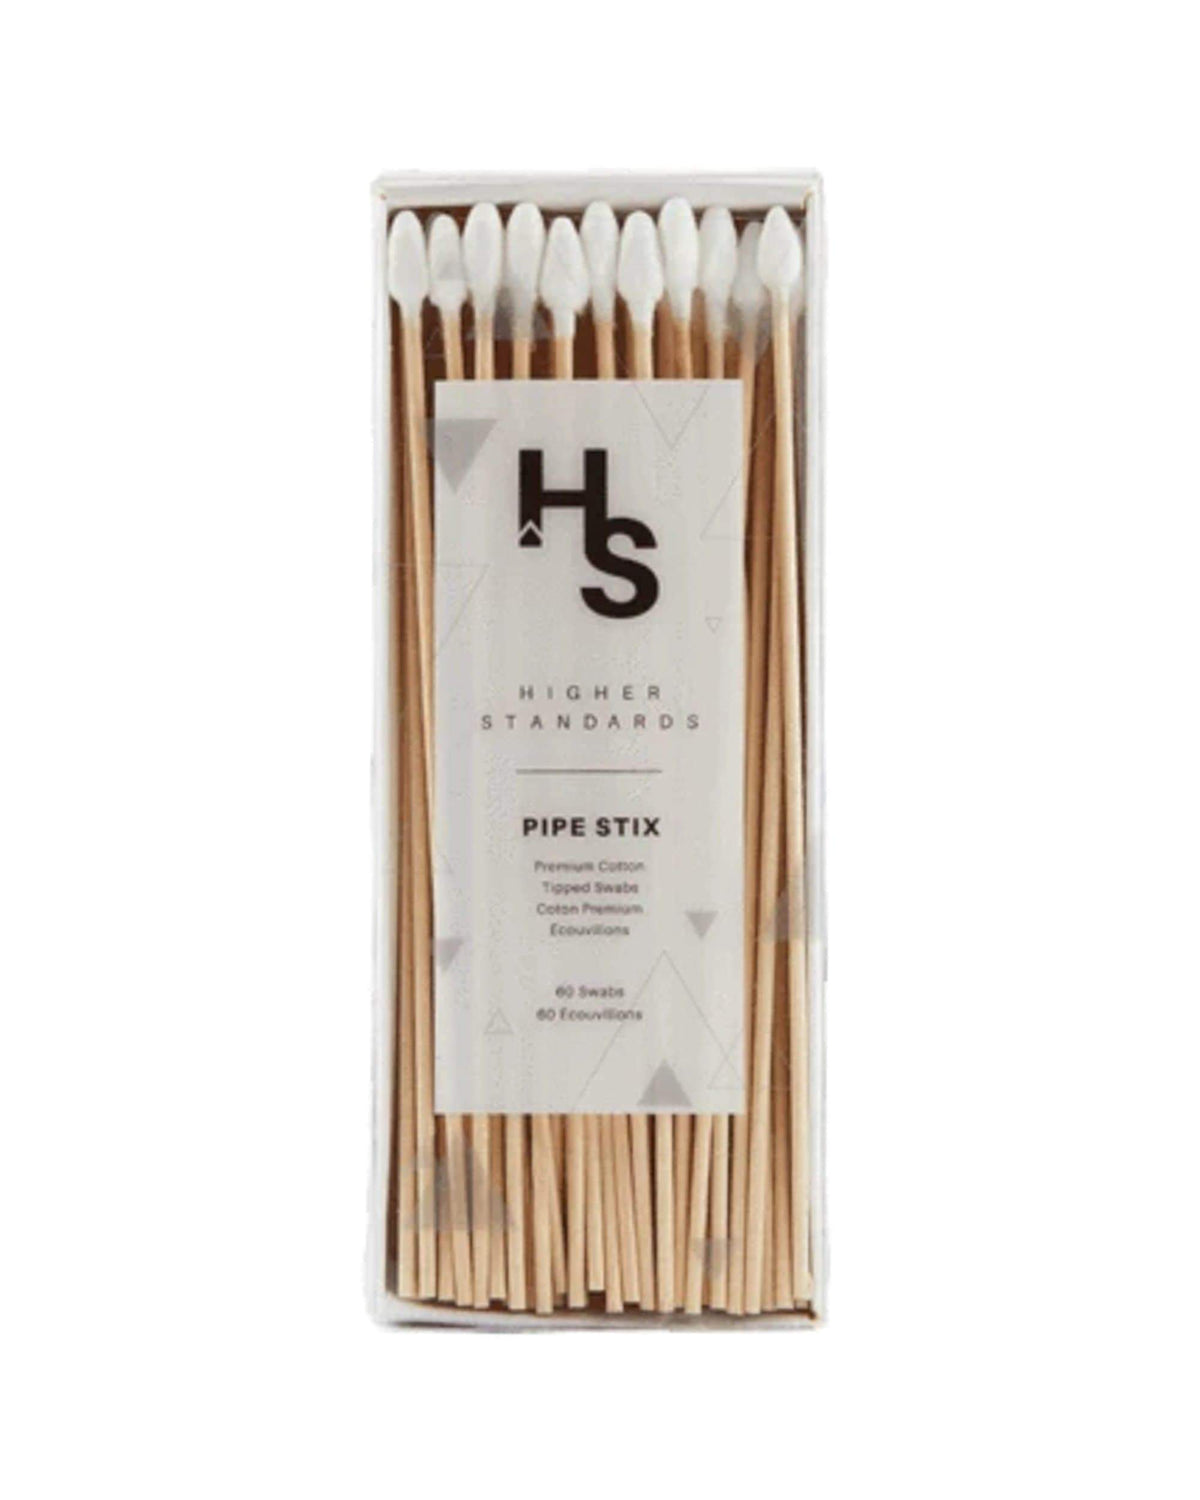 Pipe Stix Cotton Swabs Box of 60 - Higher Standards Higher Standards